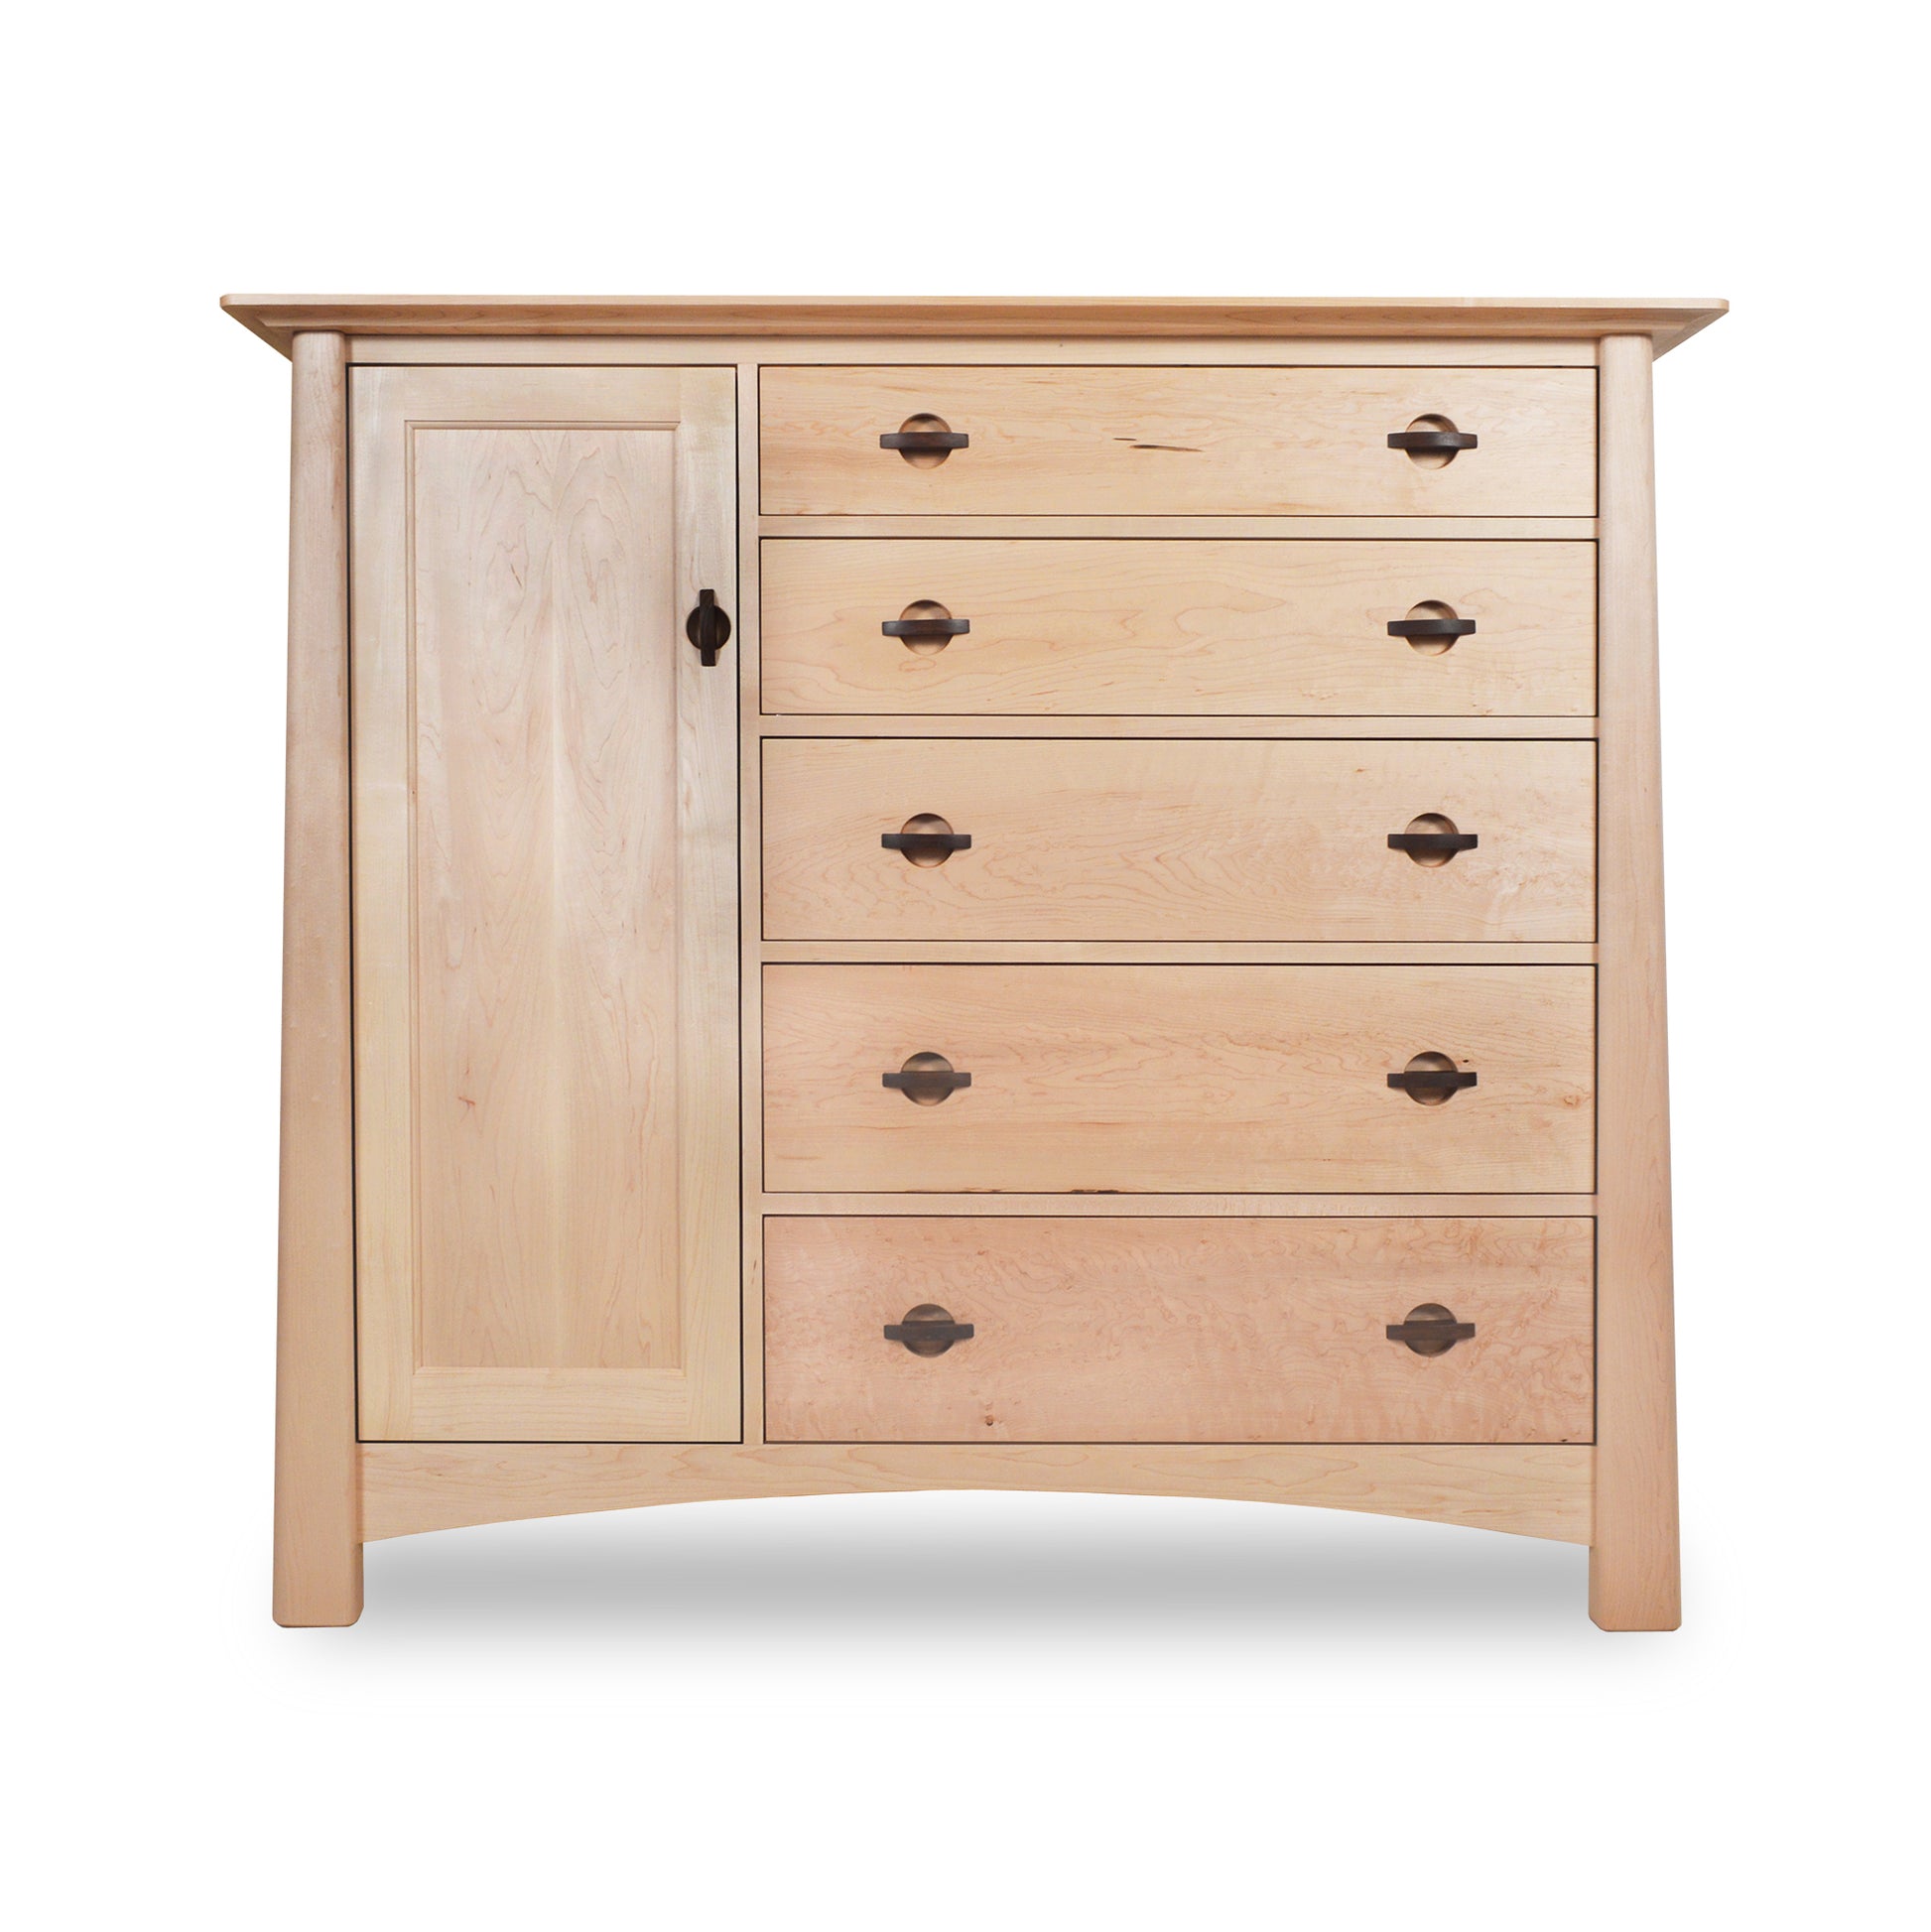 A solid wood Maple Corner Woodworks Cherry Moon Gent's Chest with a single door on the left and five drawers on the right, set against a white background.